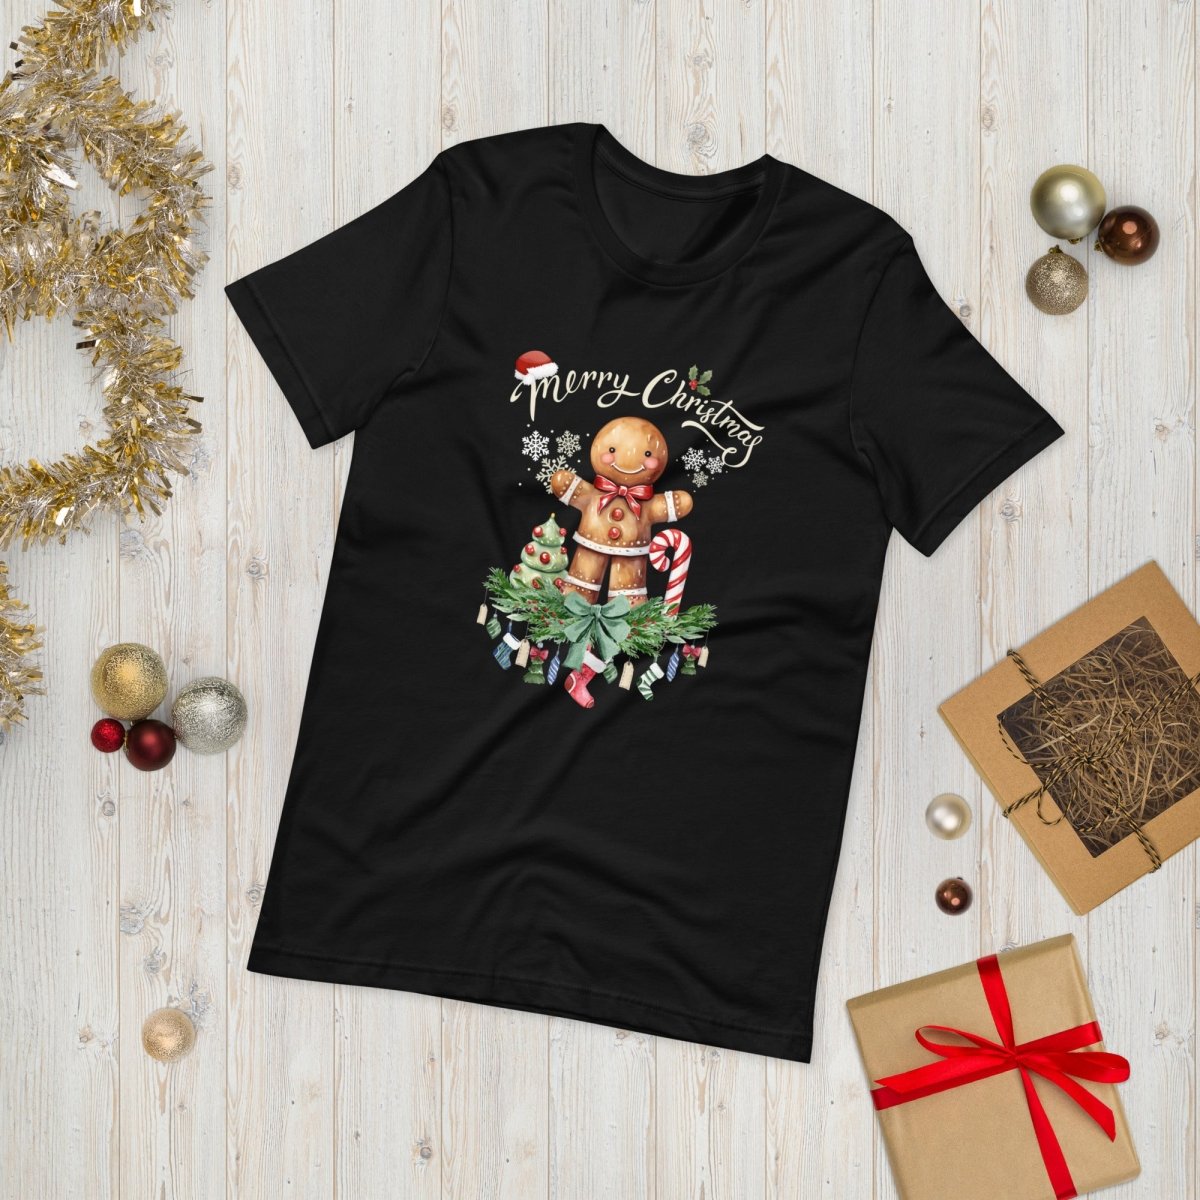 Christmas Gingerbread Man T-Shirt - High Quality Festive Family Unisex T-Shirts, Gift for Candy Lovers, Cute Christmas Shirt, Christmas Candy - Everything Pixel